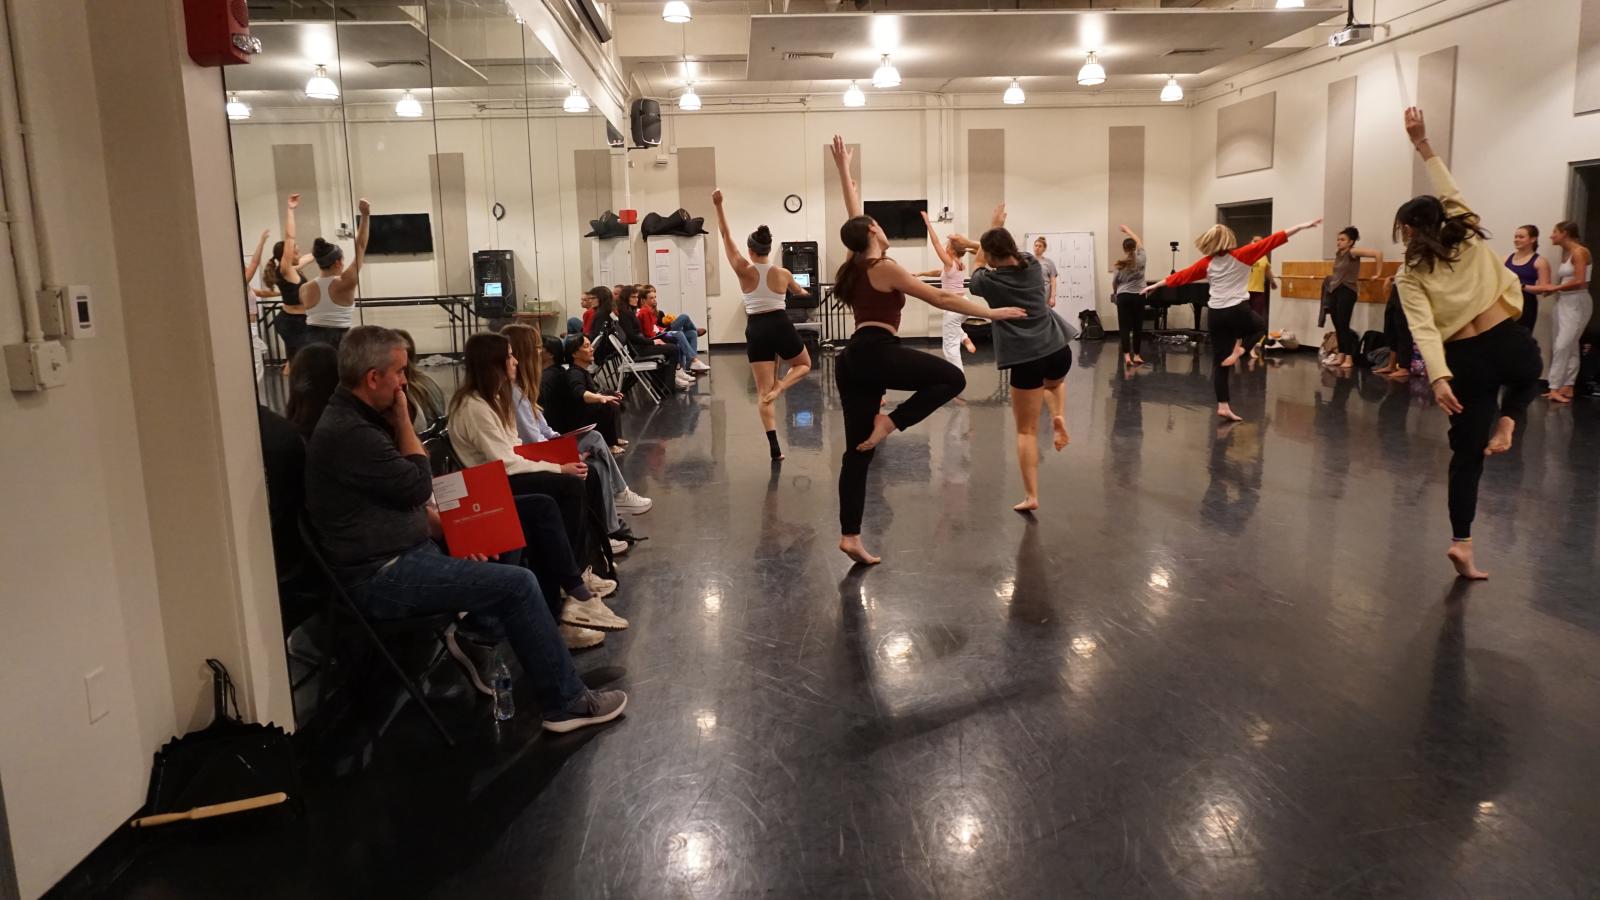 Dancers rehearsing in a studio with an audience